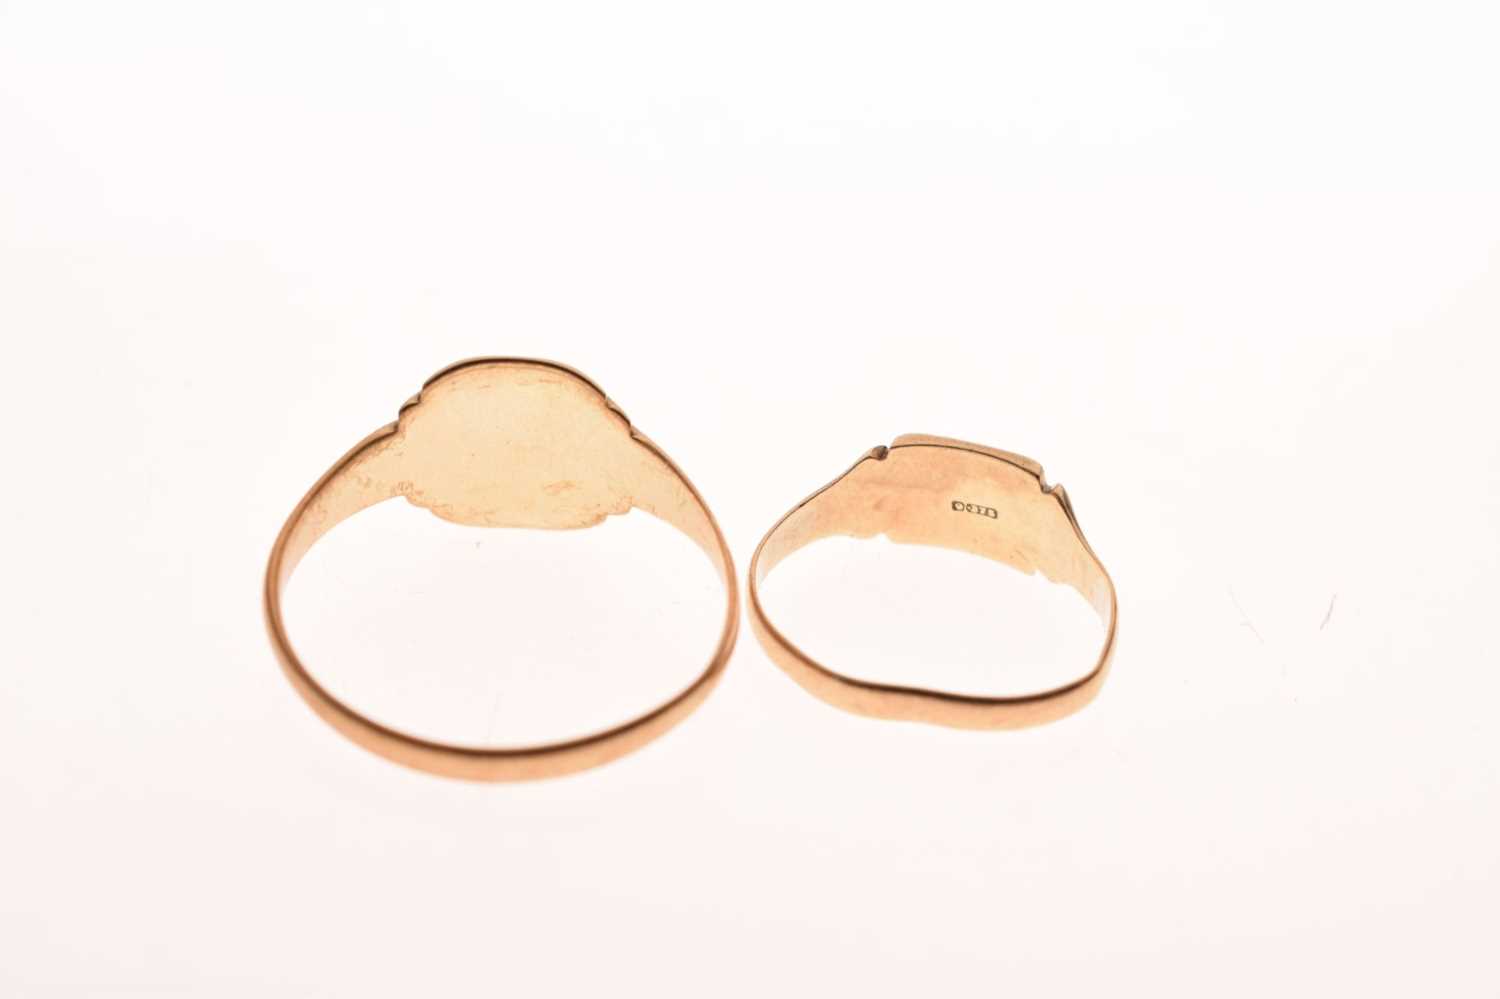 Two 9ct gold signet rings - Image 3 of 7